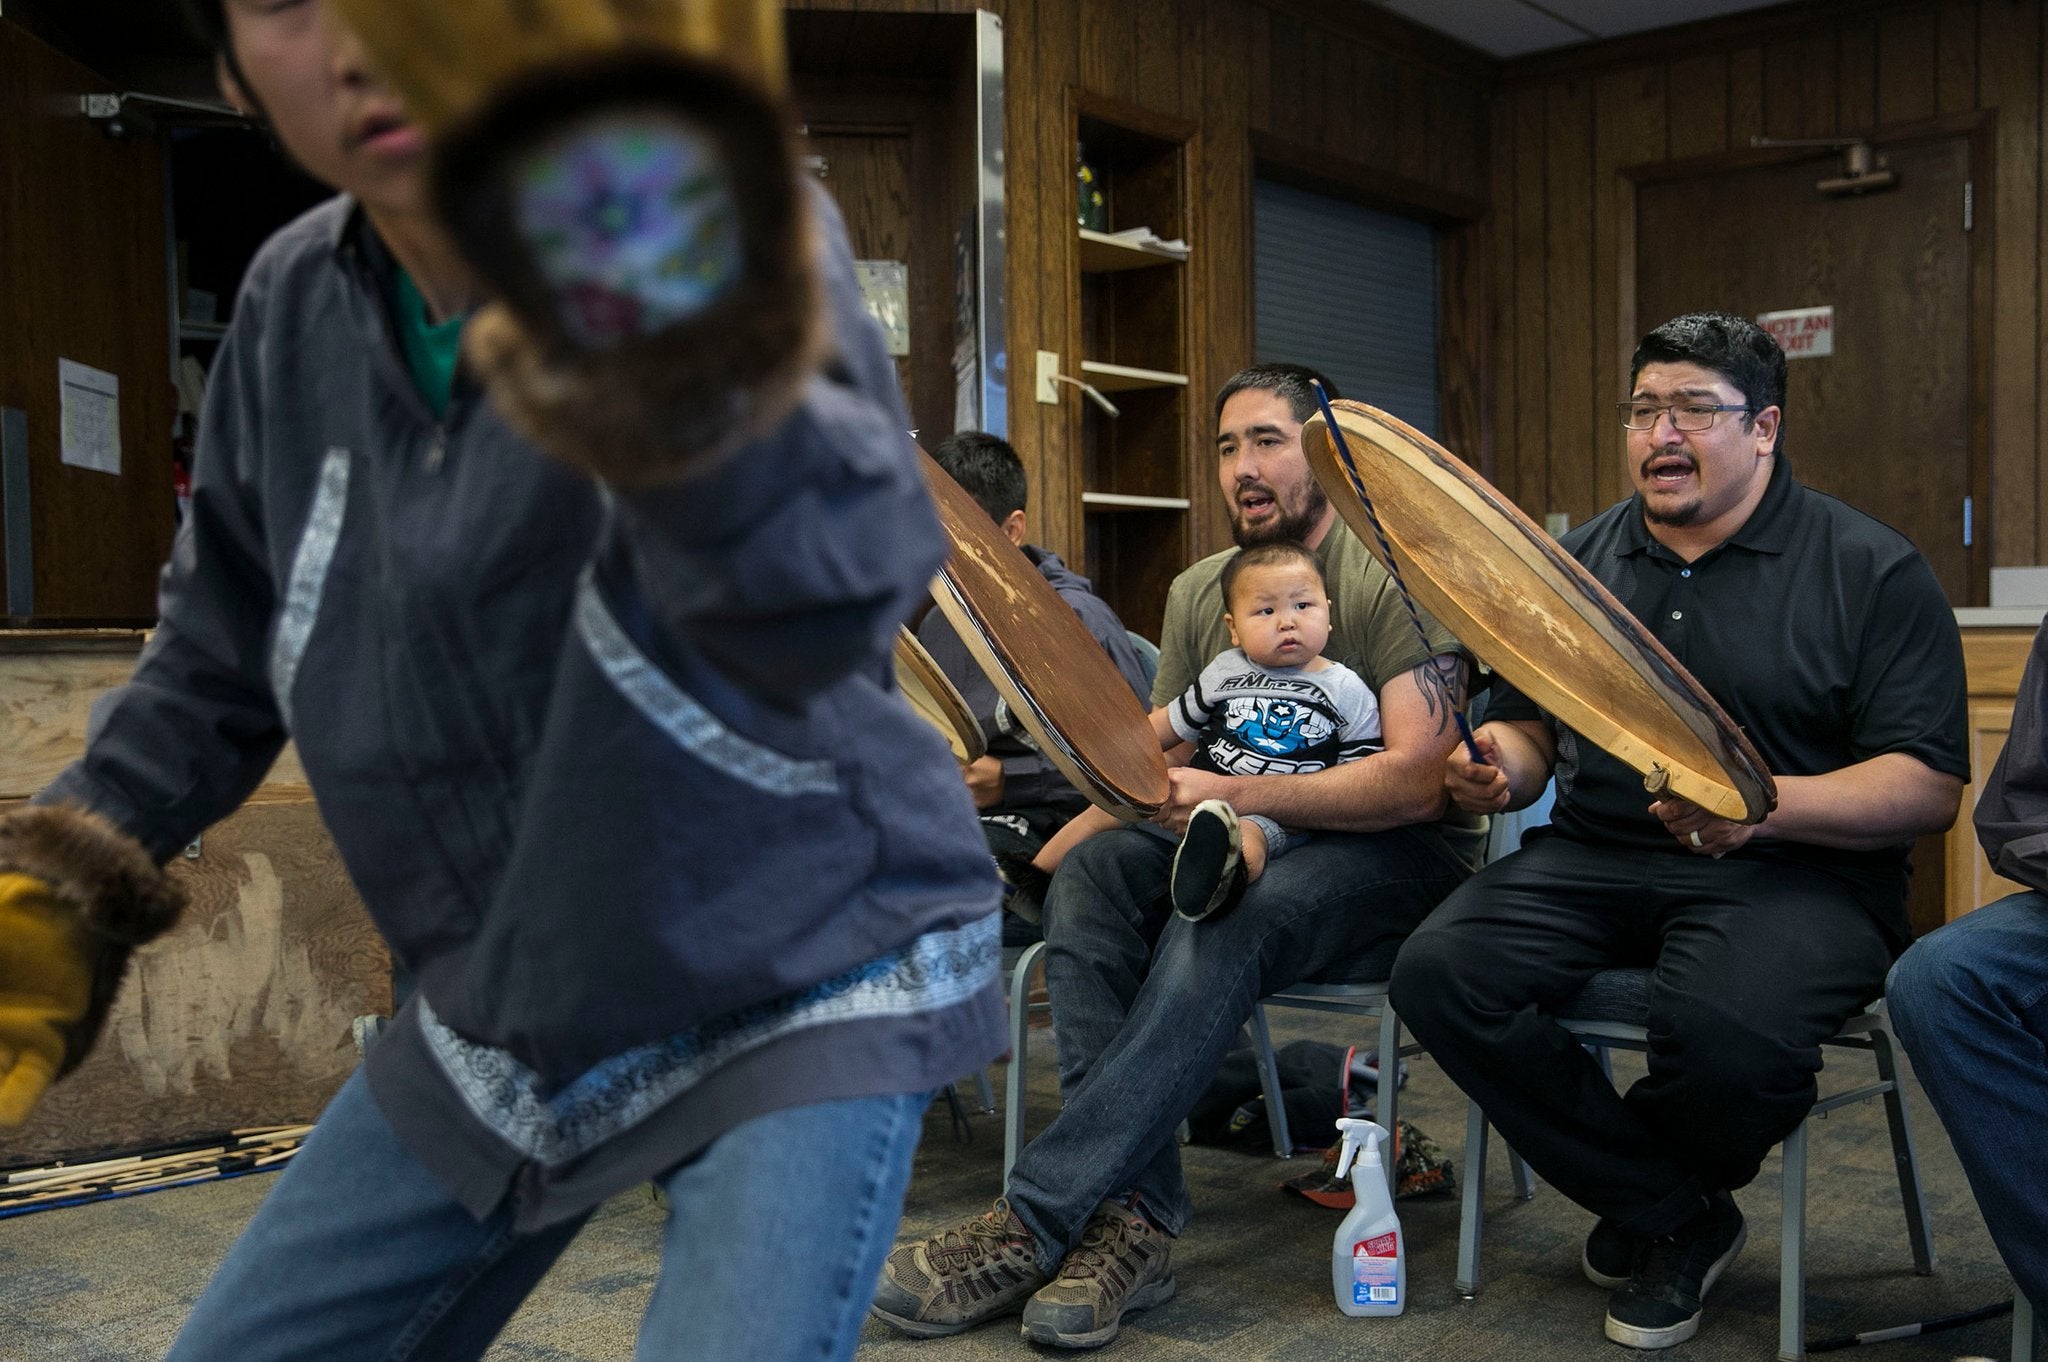 Bryan Muktoyuk (right) rehearses traditional Inupiaq songs with drummers and dancers in Nome